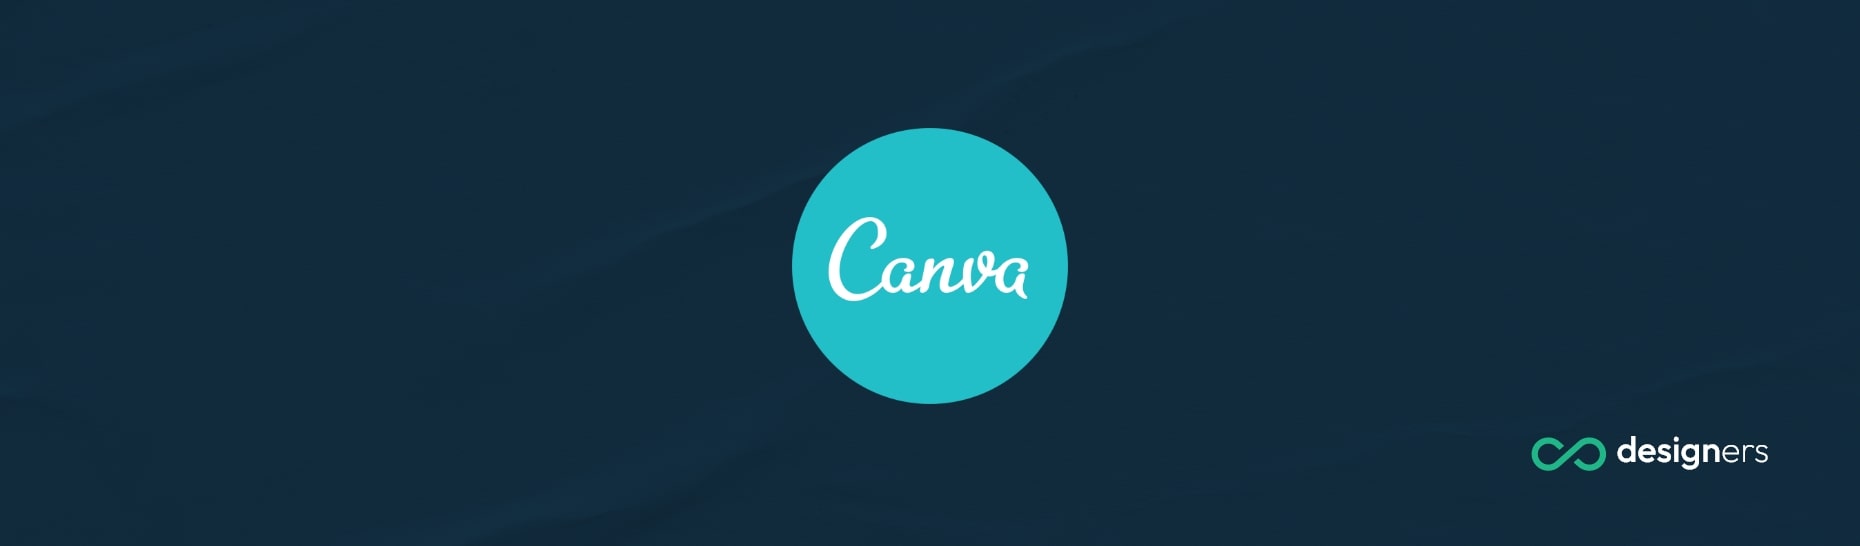 How Do I Find My Favorites on Canva? 